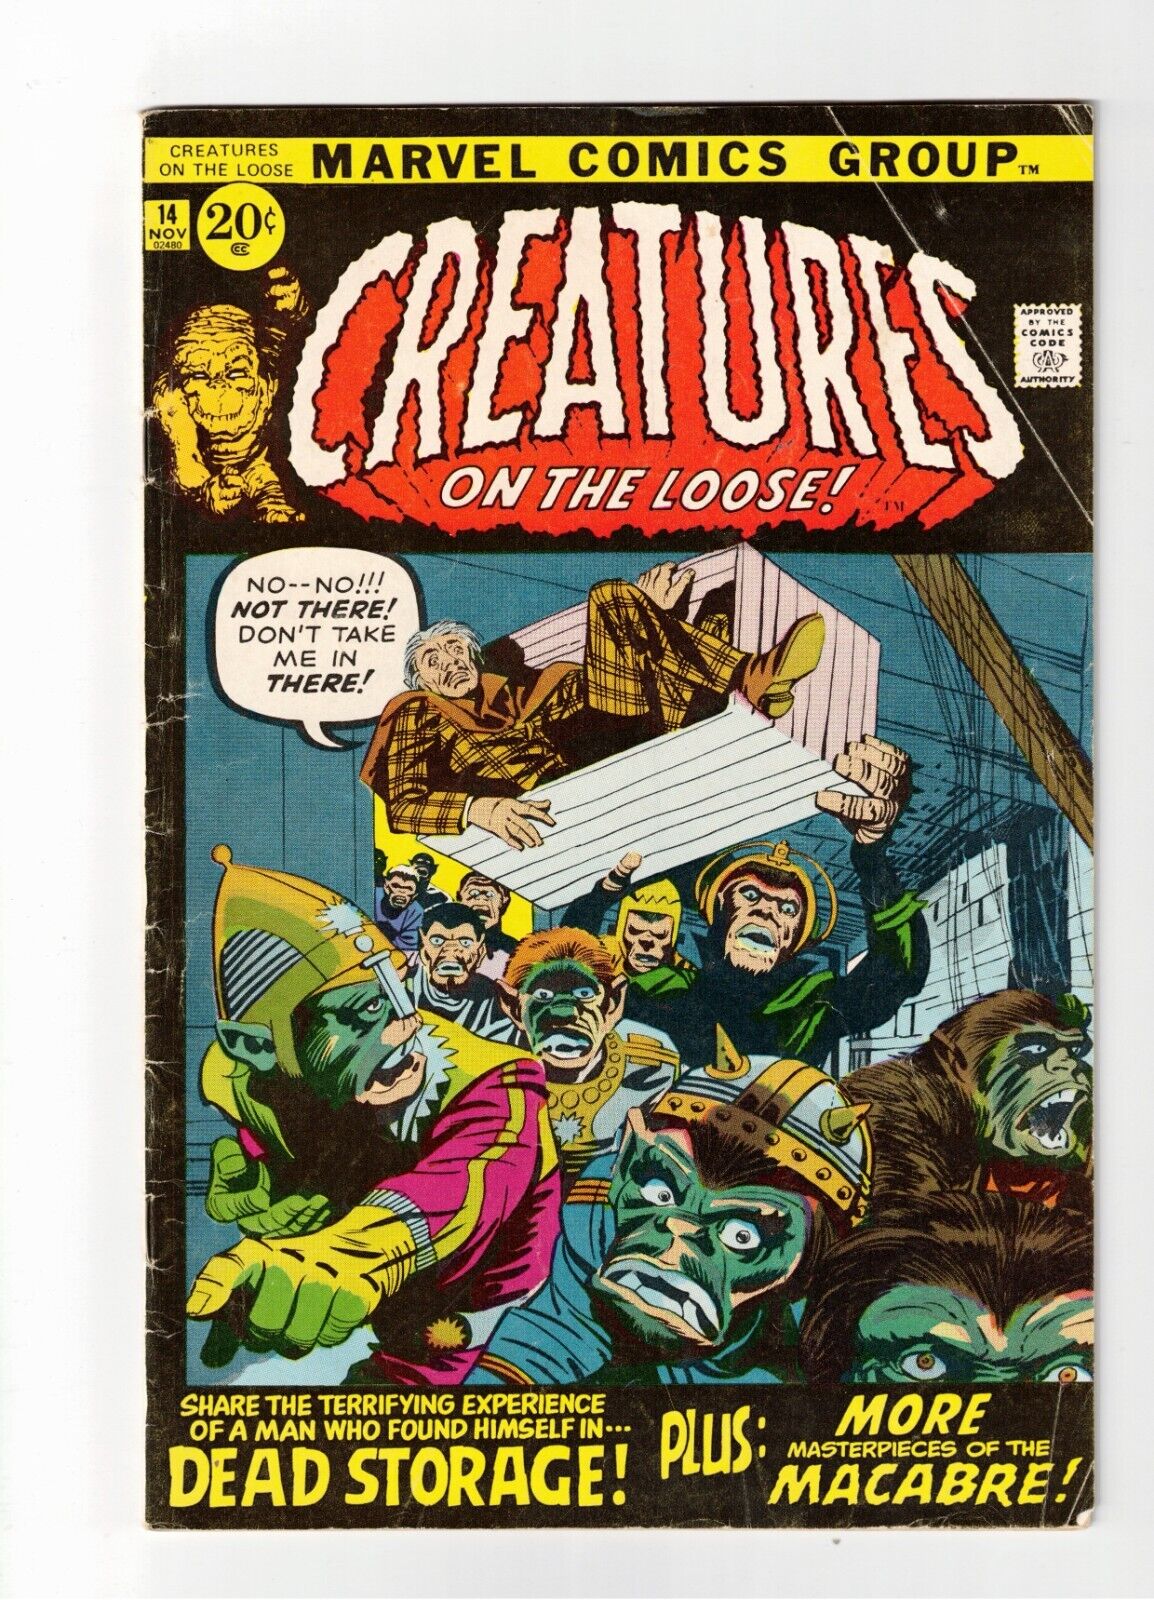 CREATURES ON THE LOOSE #14 1971MARVEL COMICS